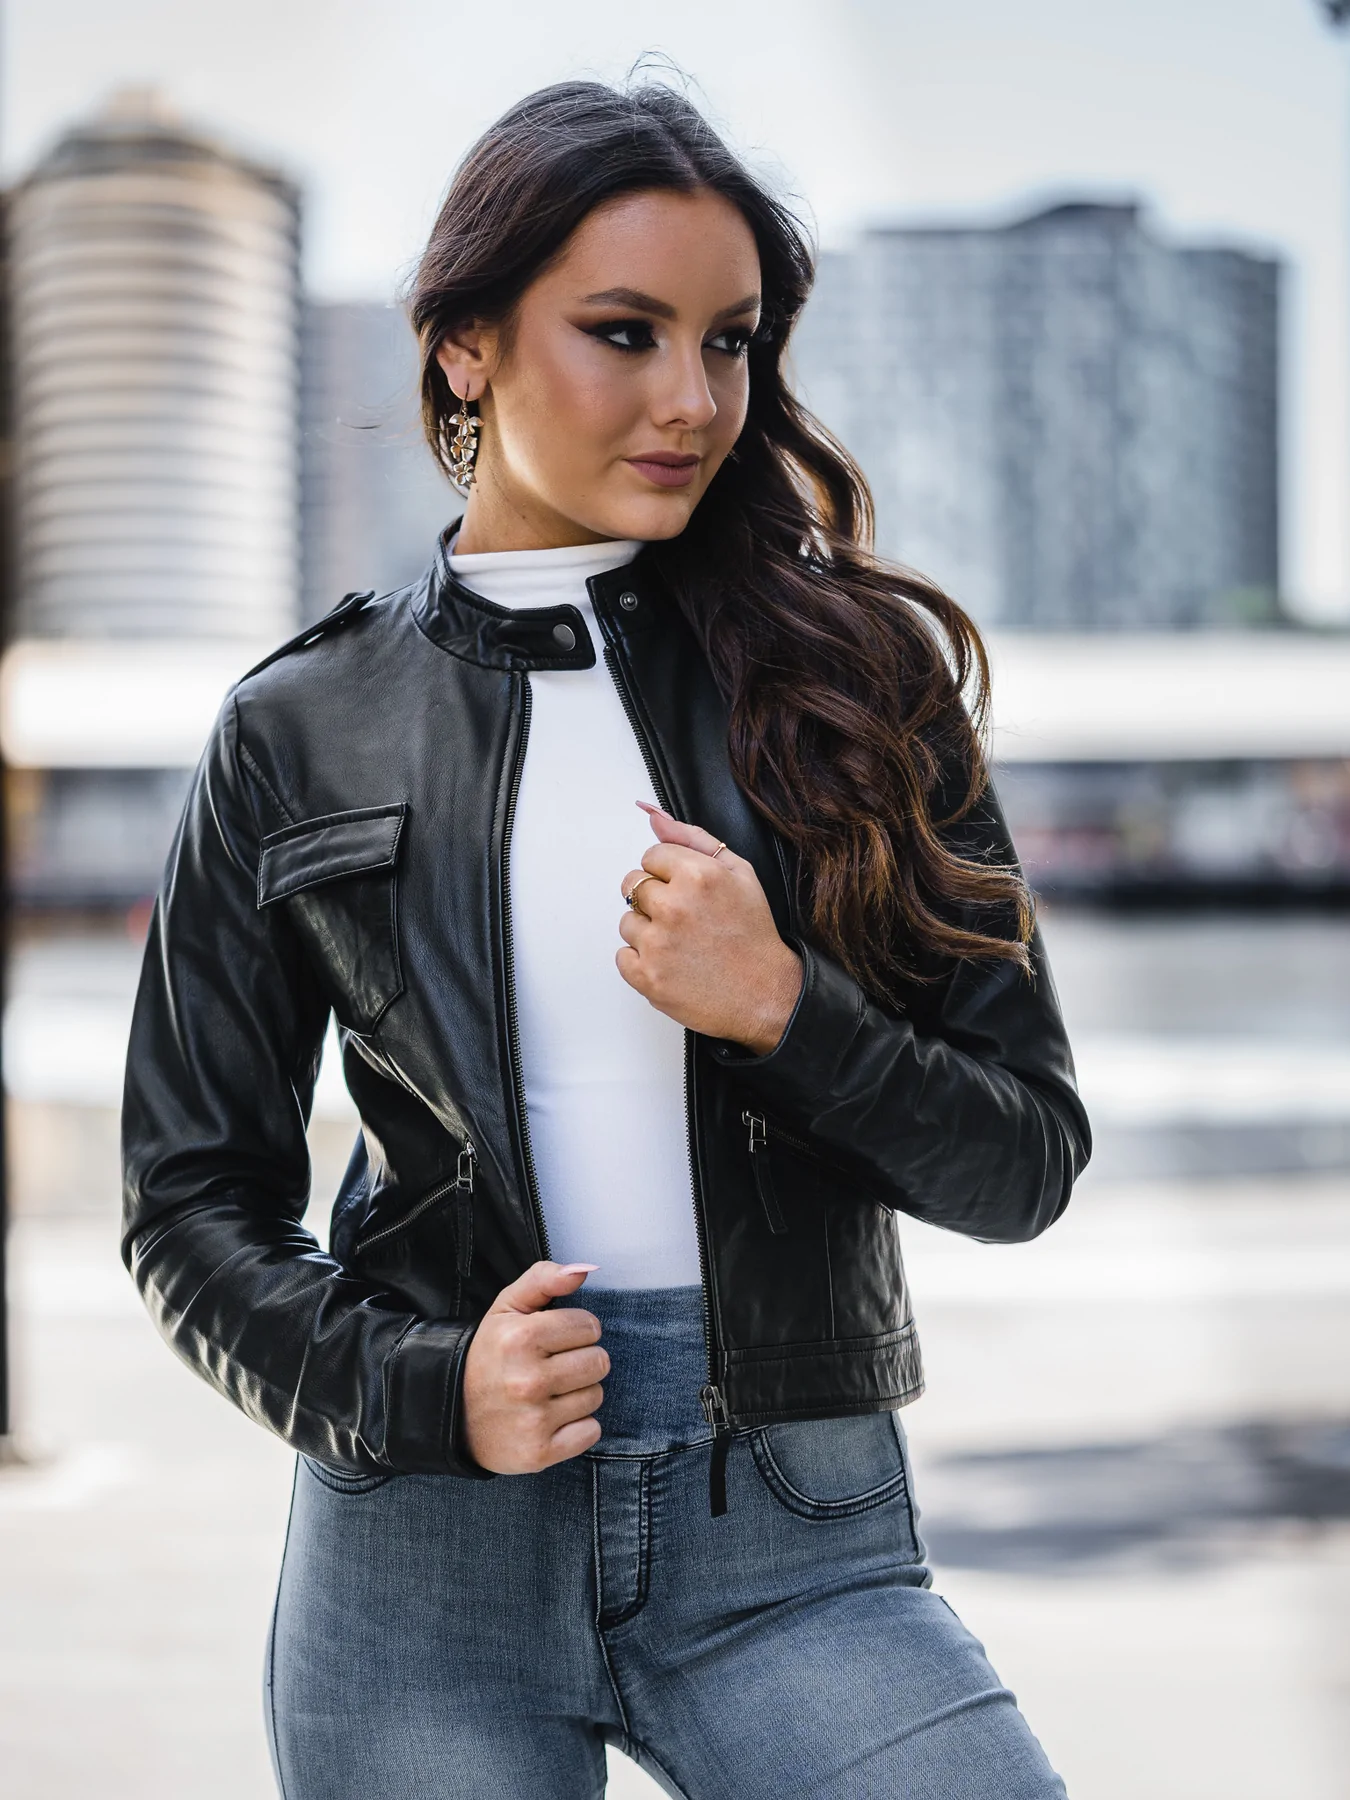 Women's Fashion Leather Jacket Outfit